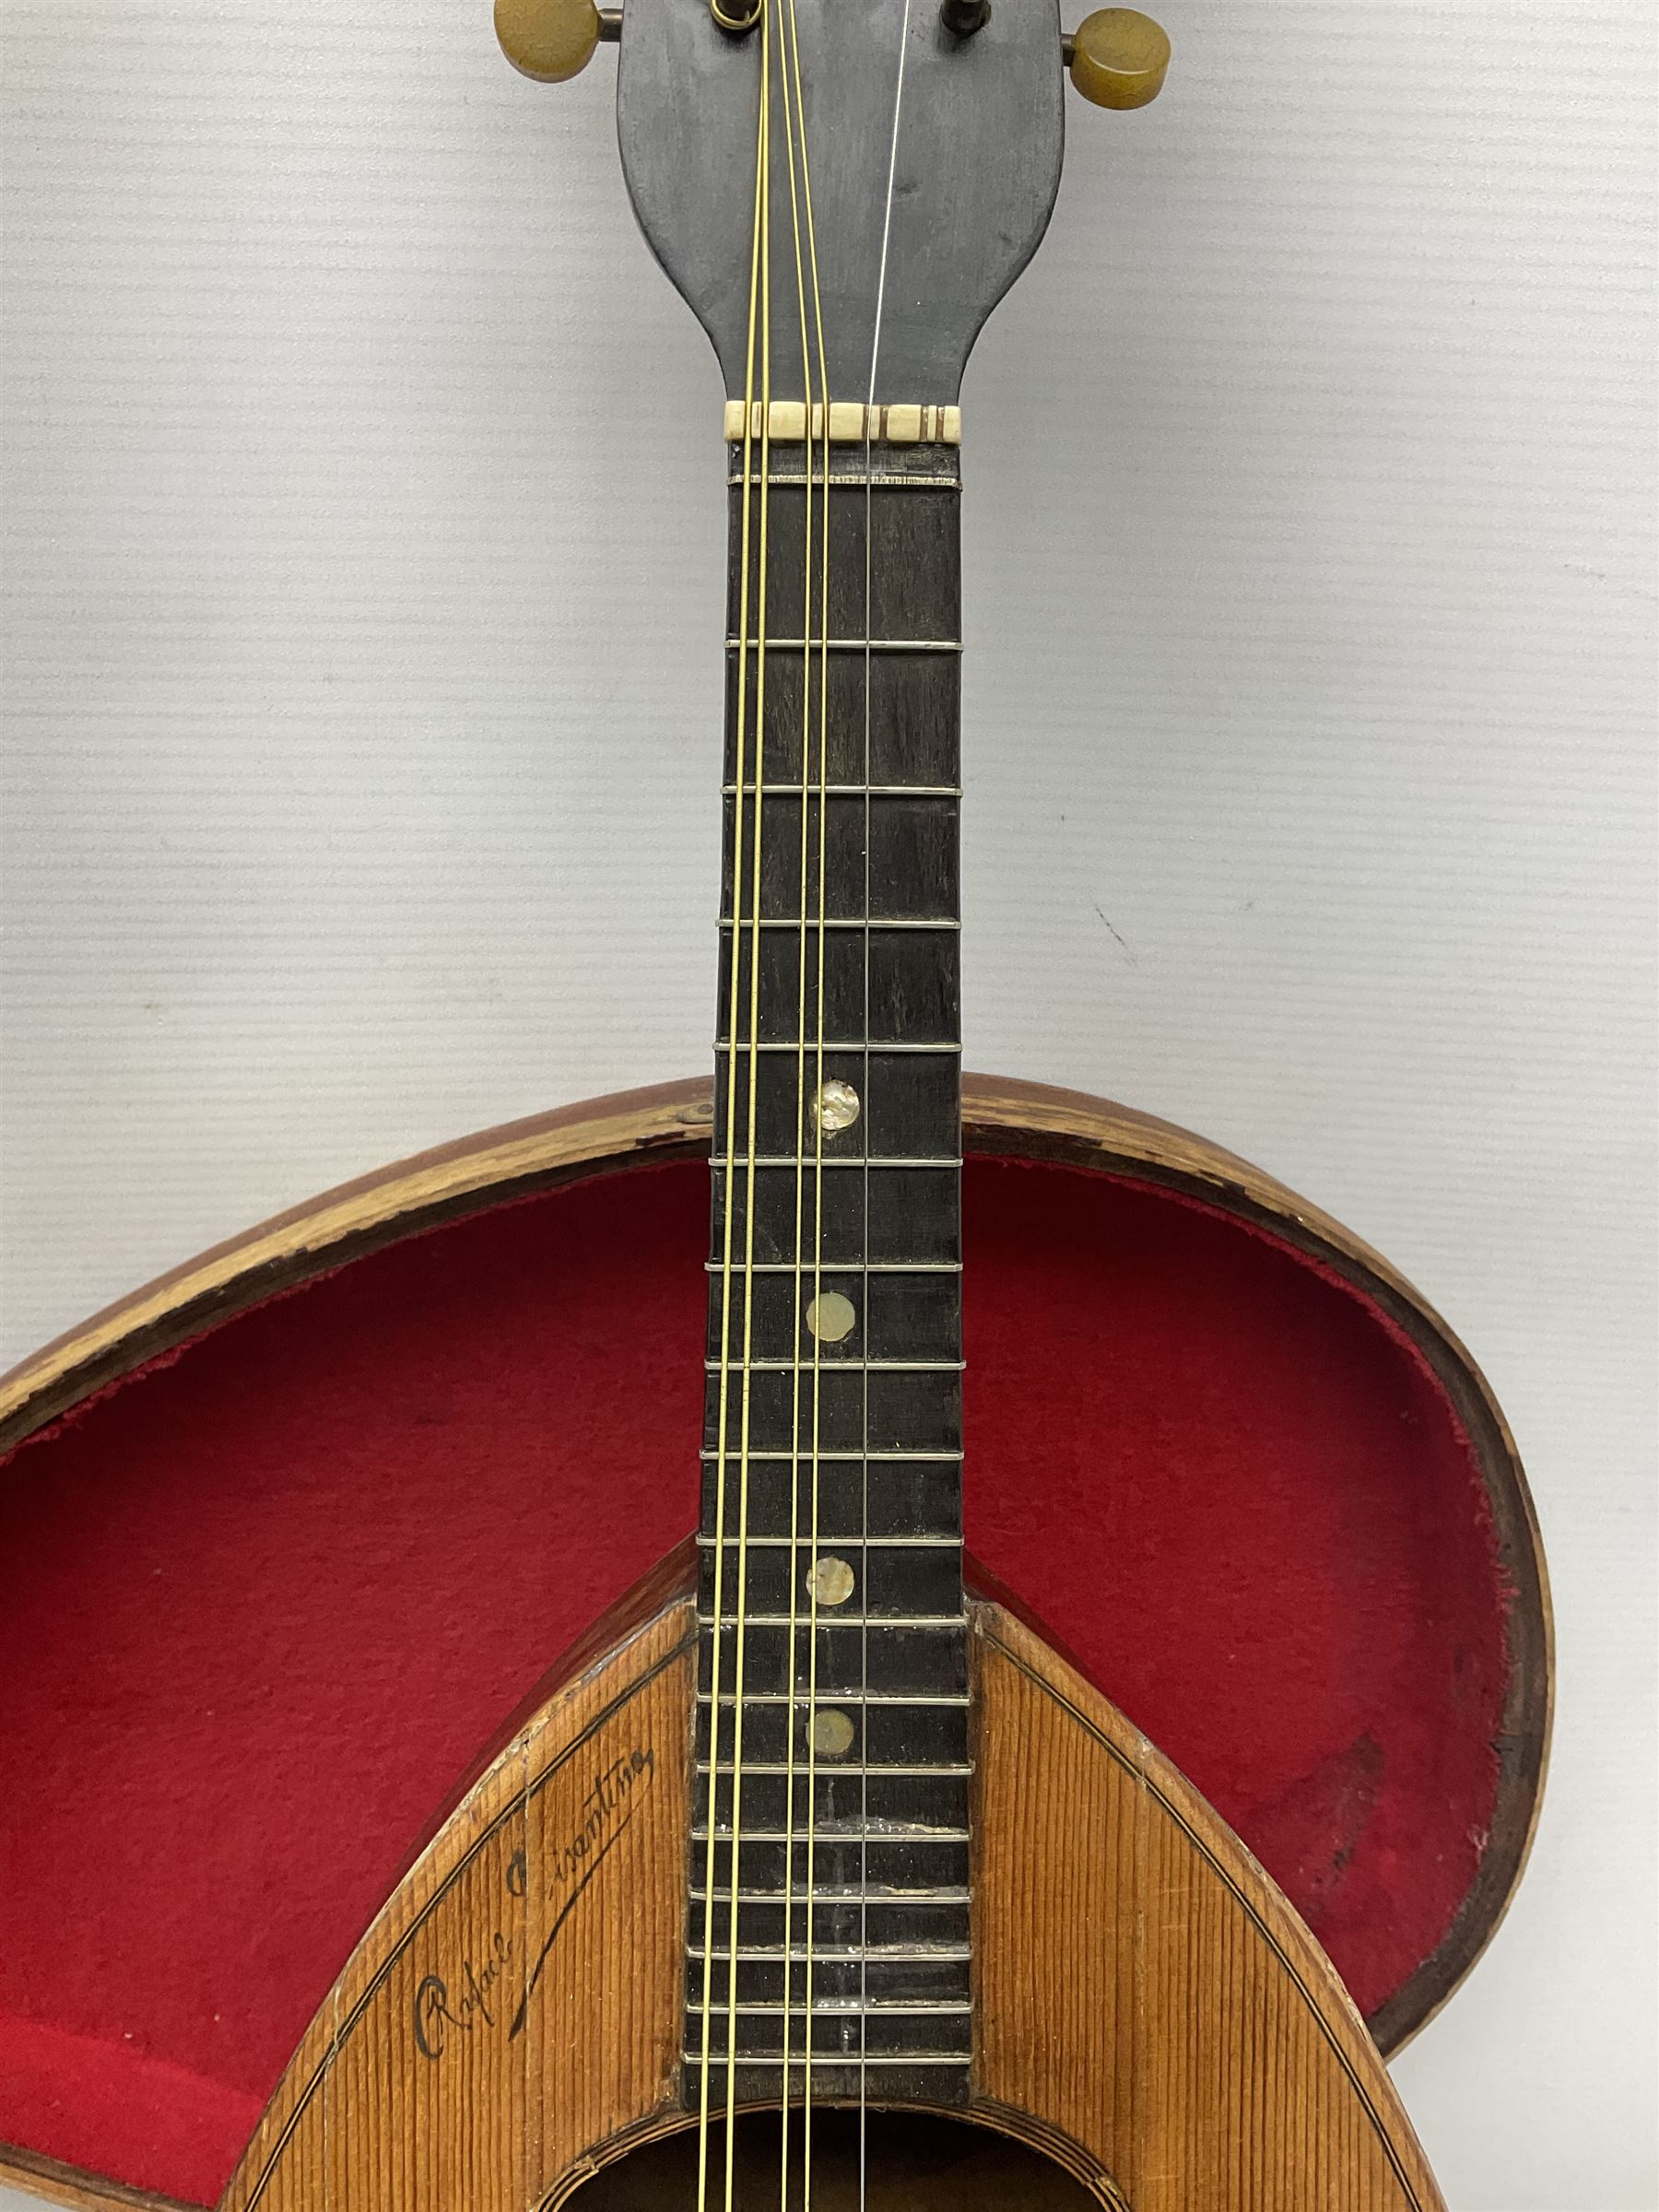 Early 20th century Italian Rafaele Disantino eight-string mandolin with two-piece back and spruce to - Image 4 of 14